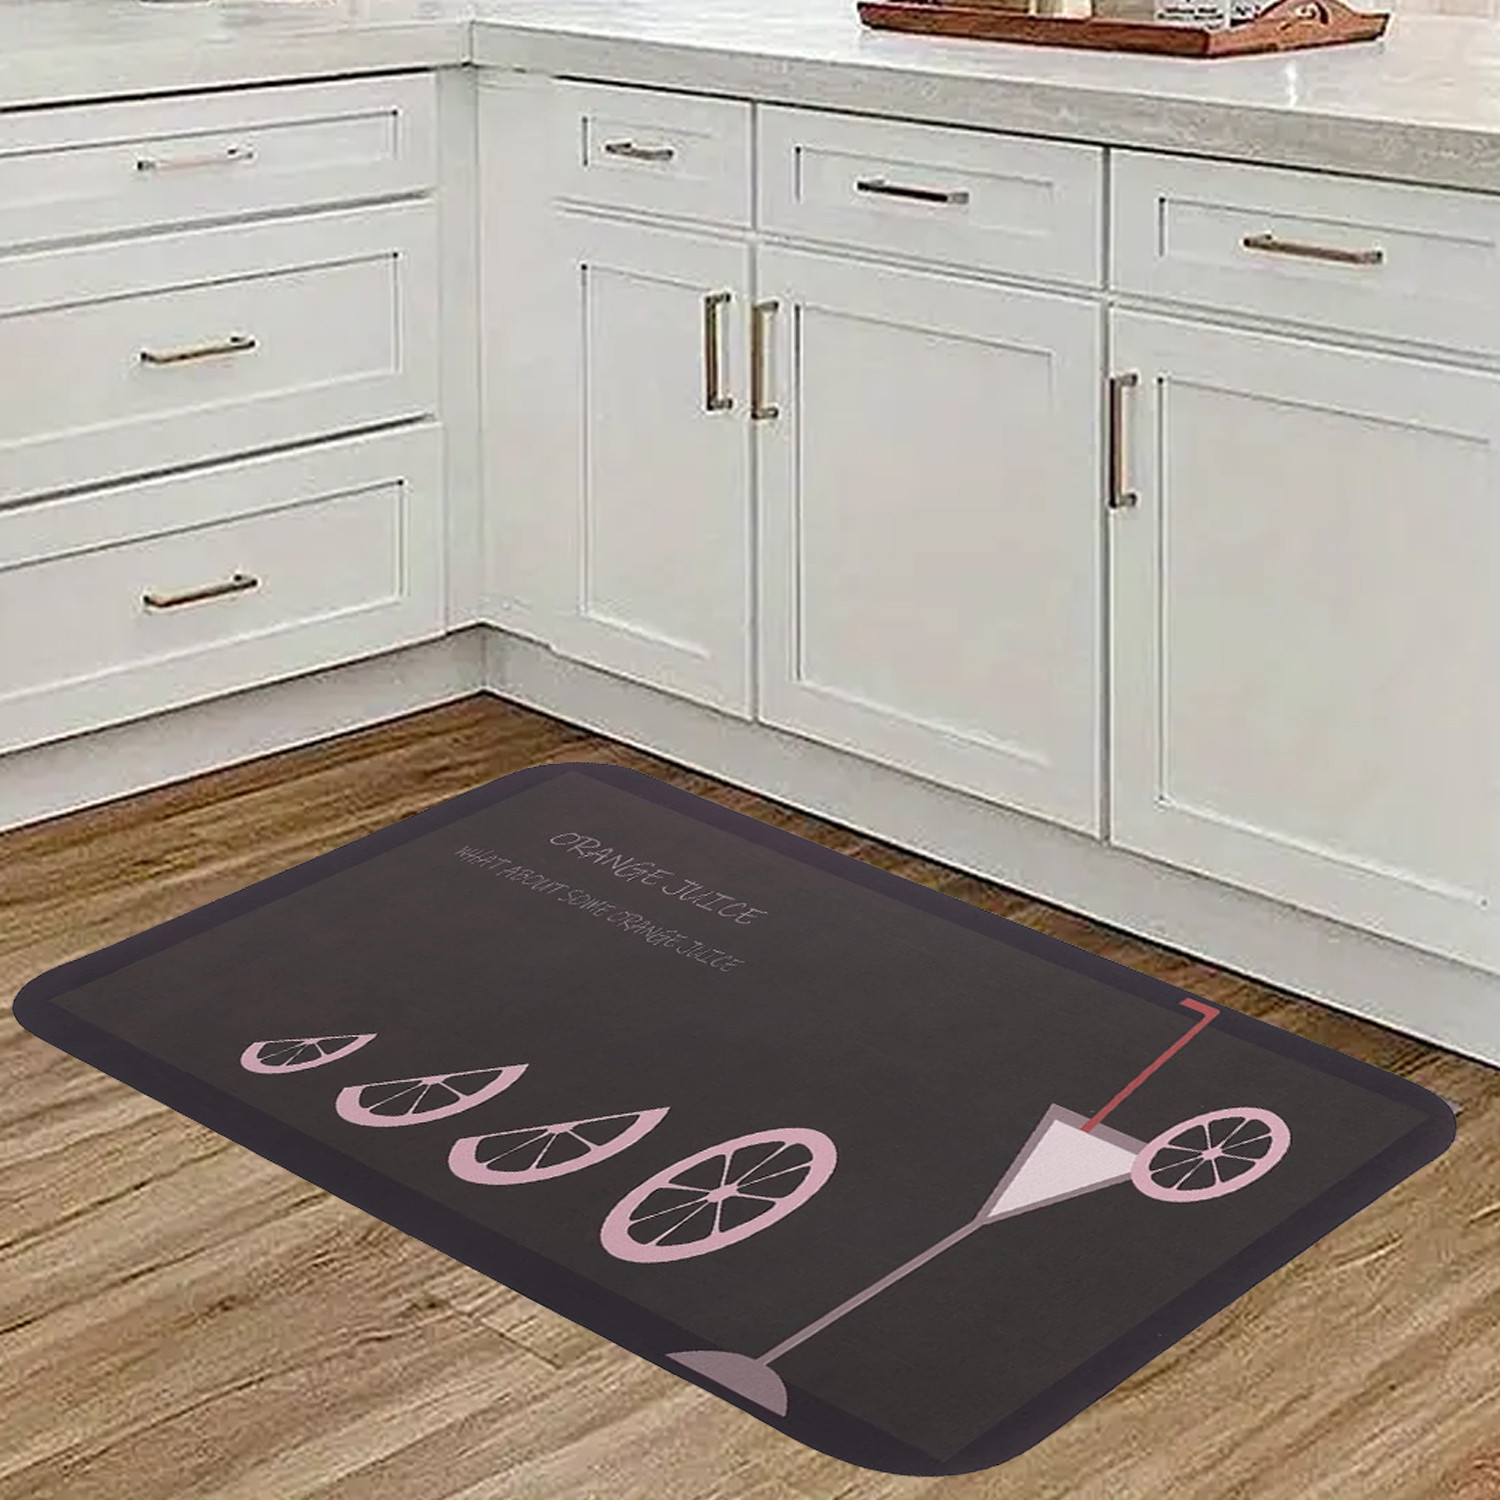 Kuber Industries PVC Kitchen Floor Mat|Anti-Skid Backing|Mats for Kitchen Floor |Easily Washable|Idol for Home, Kitchen Entrance| CF-220809 | Brown